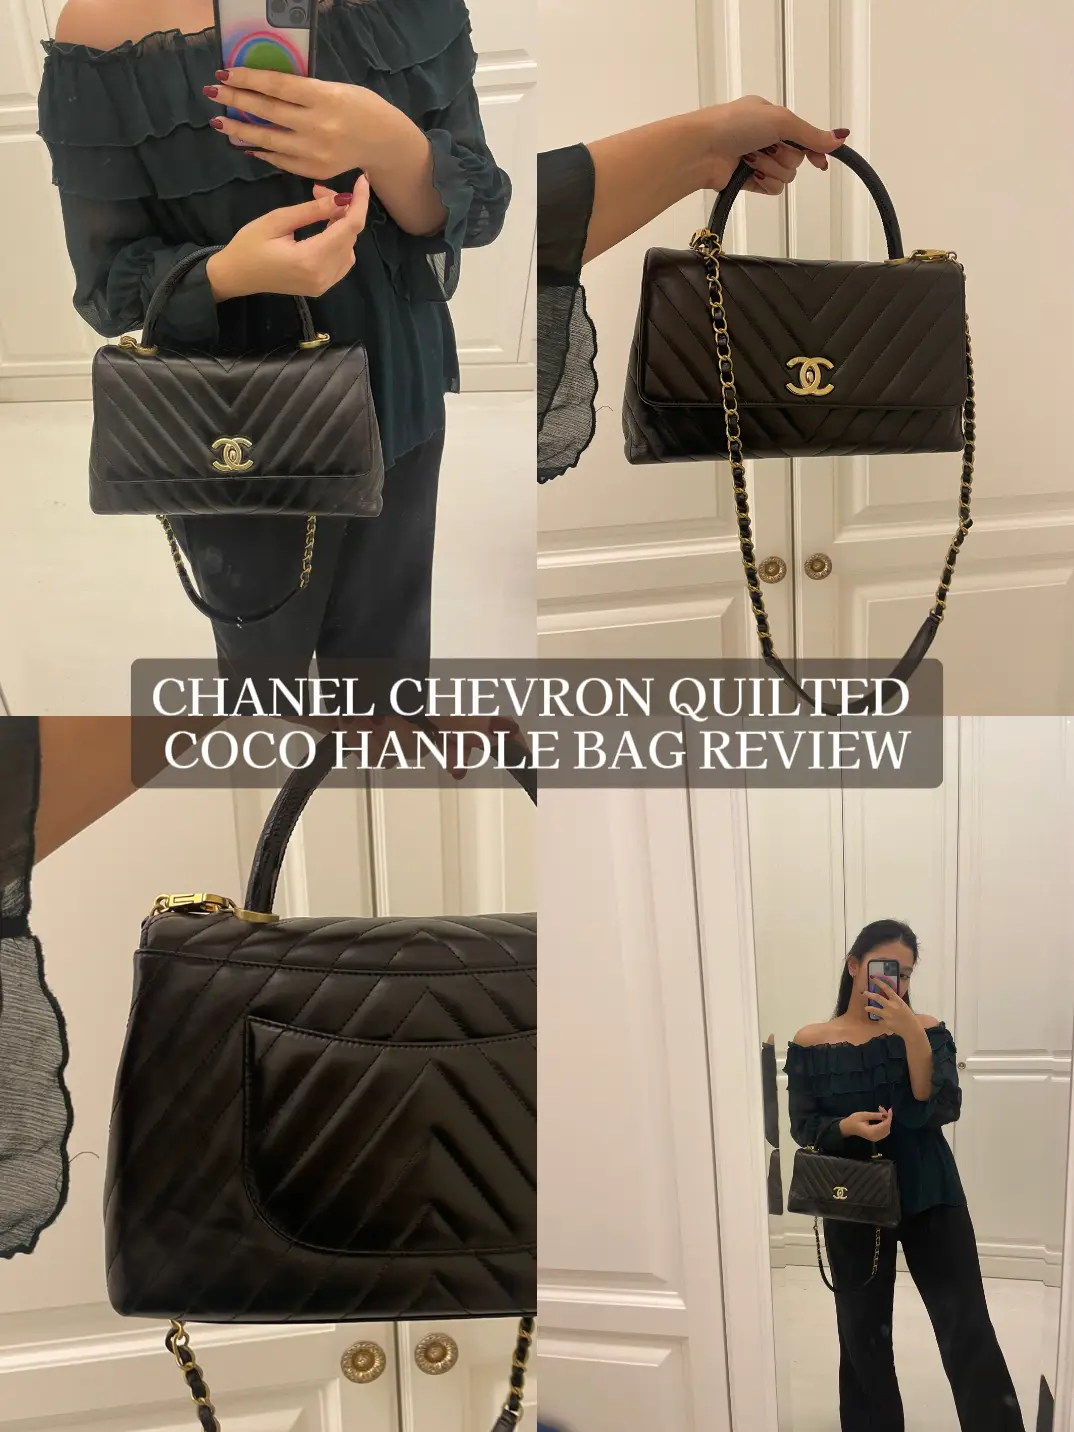 Chanel diamond quilted Chevron flap bag